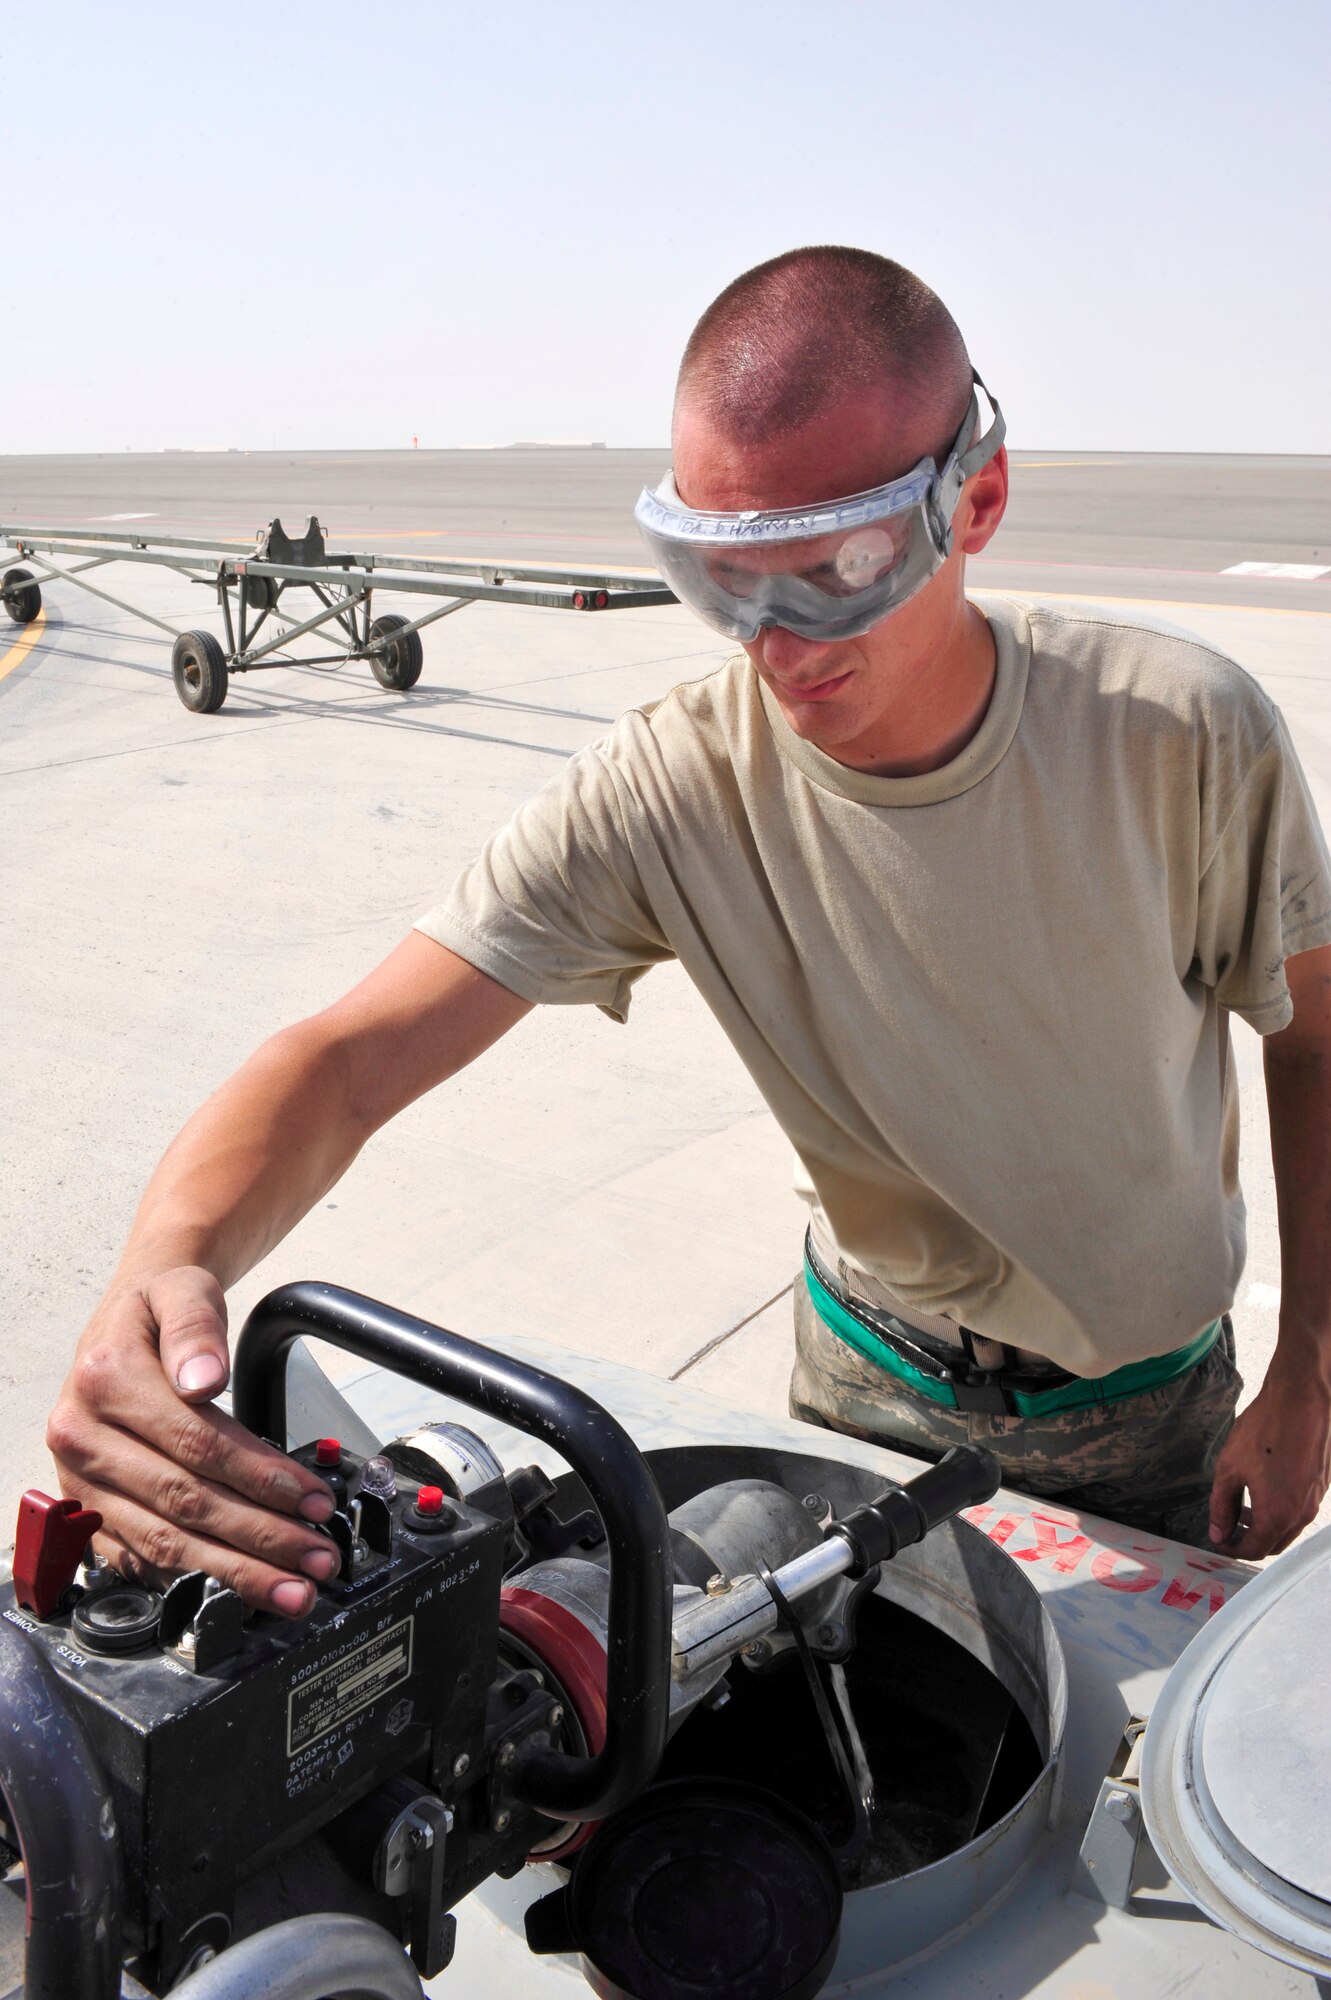 SOUTHWEST ASIA -Senior Airman Corey Keele, 380th Expeditionary Maintenance
Squadron, uses a single point refuel valve to drain the boom on a KC-10
Extender Aug. 29, 2009. Airman Keele is deployed from McGuire Air Force
Base, N.J., and grew up in Long View, Wash. (U.S. Air Force photo/Tech. Sgt.
Charles Larkin Sr)